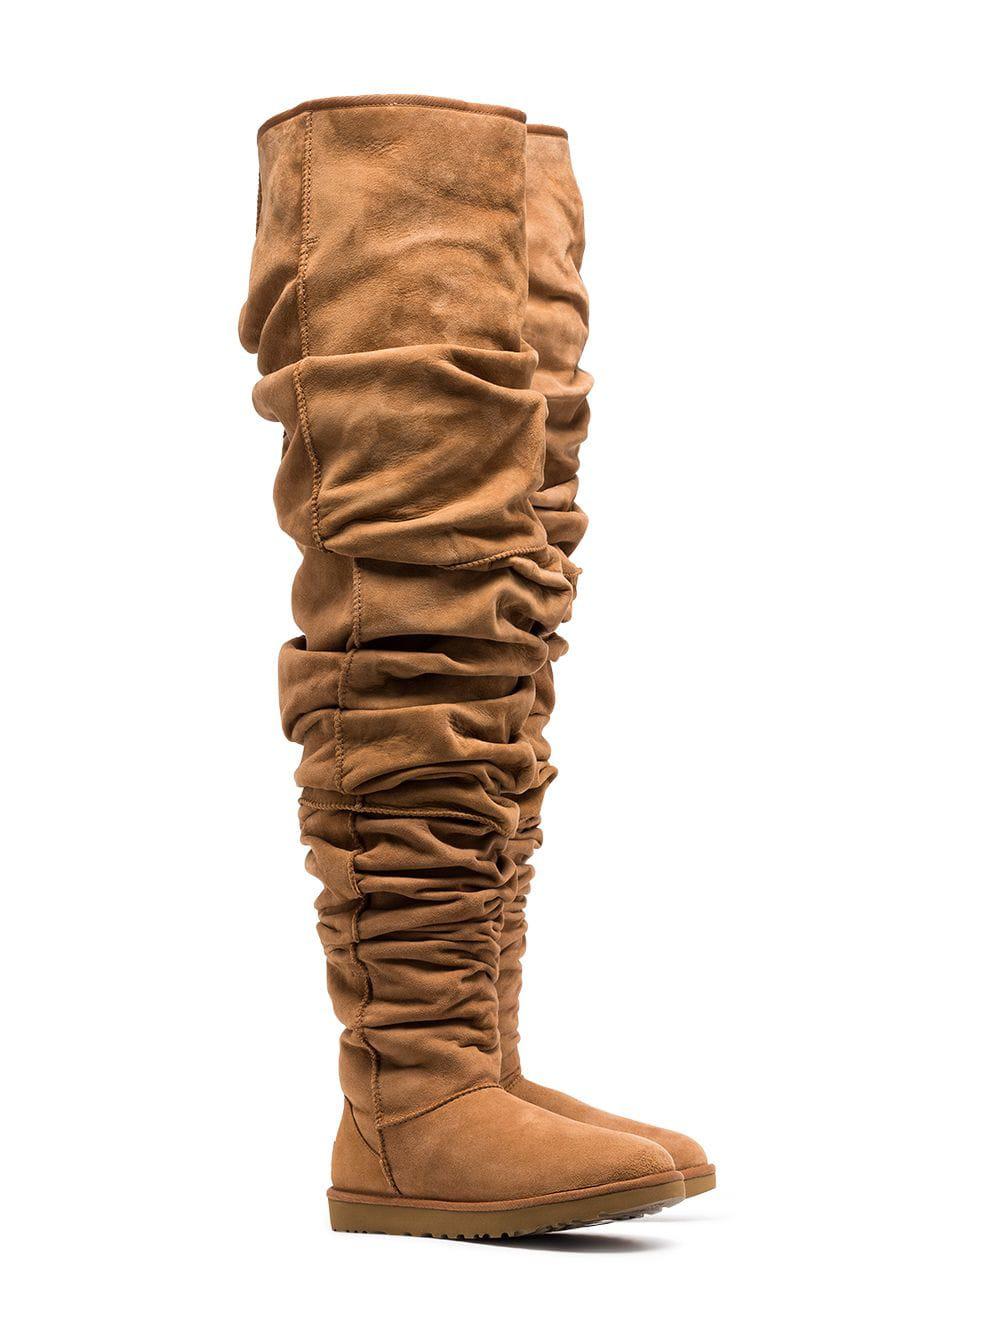 This Y-Project/UGG Collab Will Trigger You - PAPER Magazine